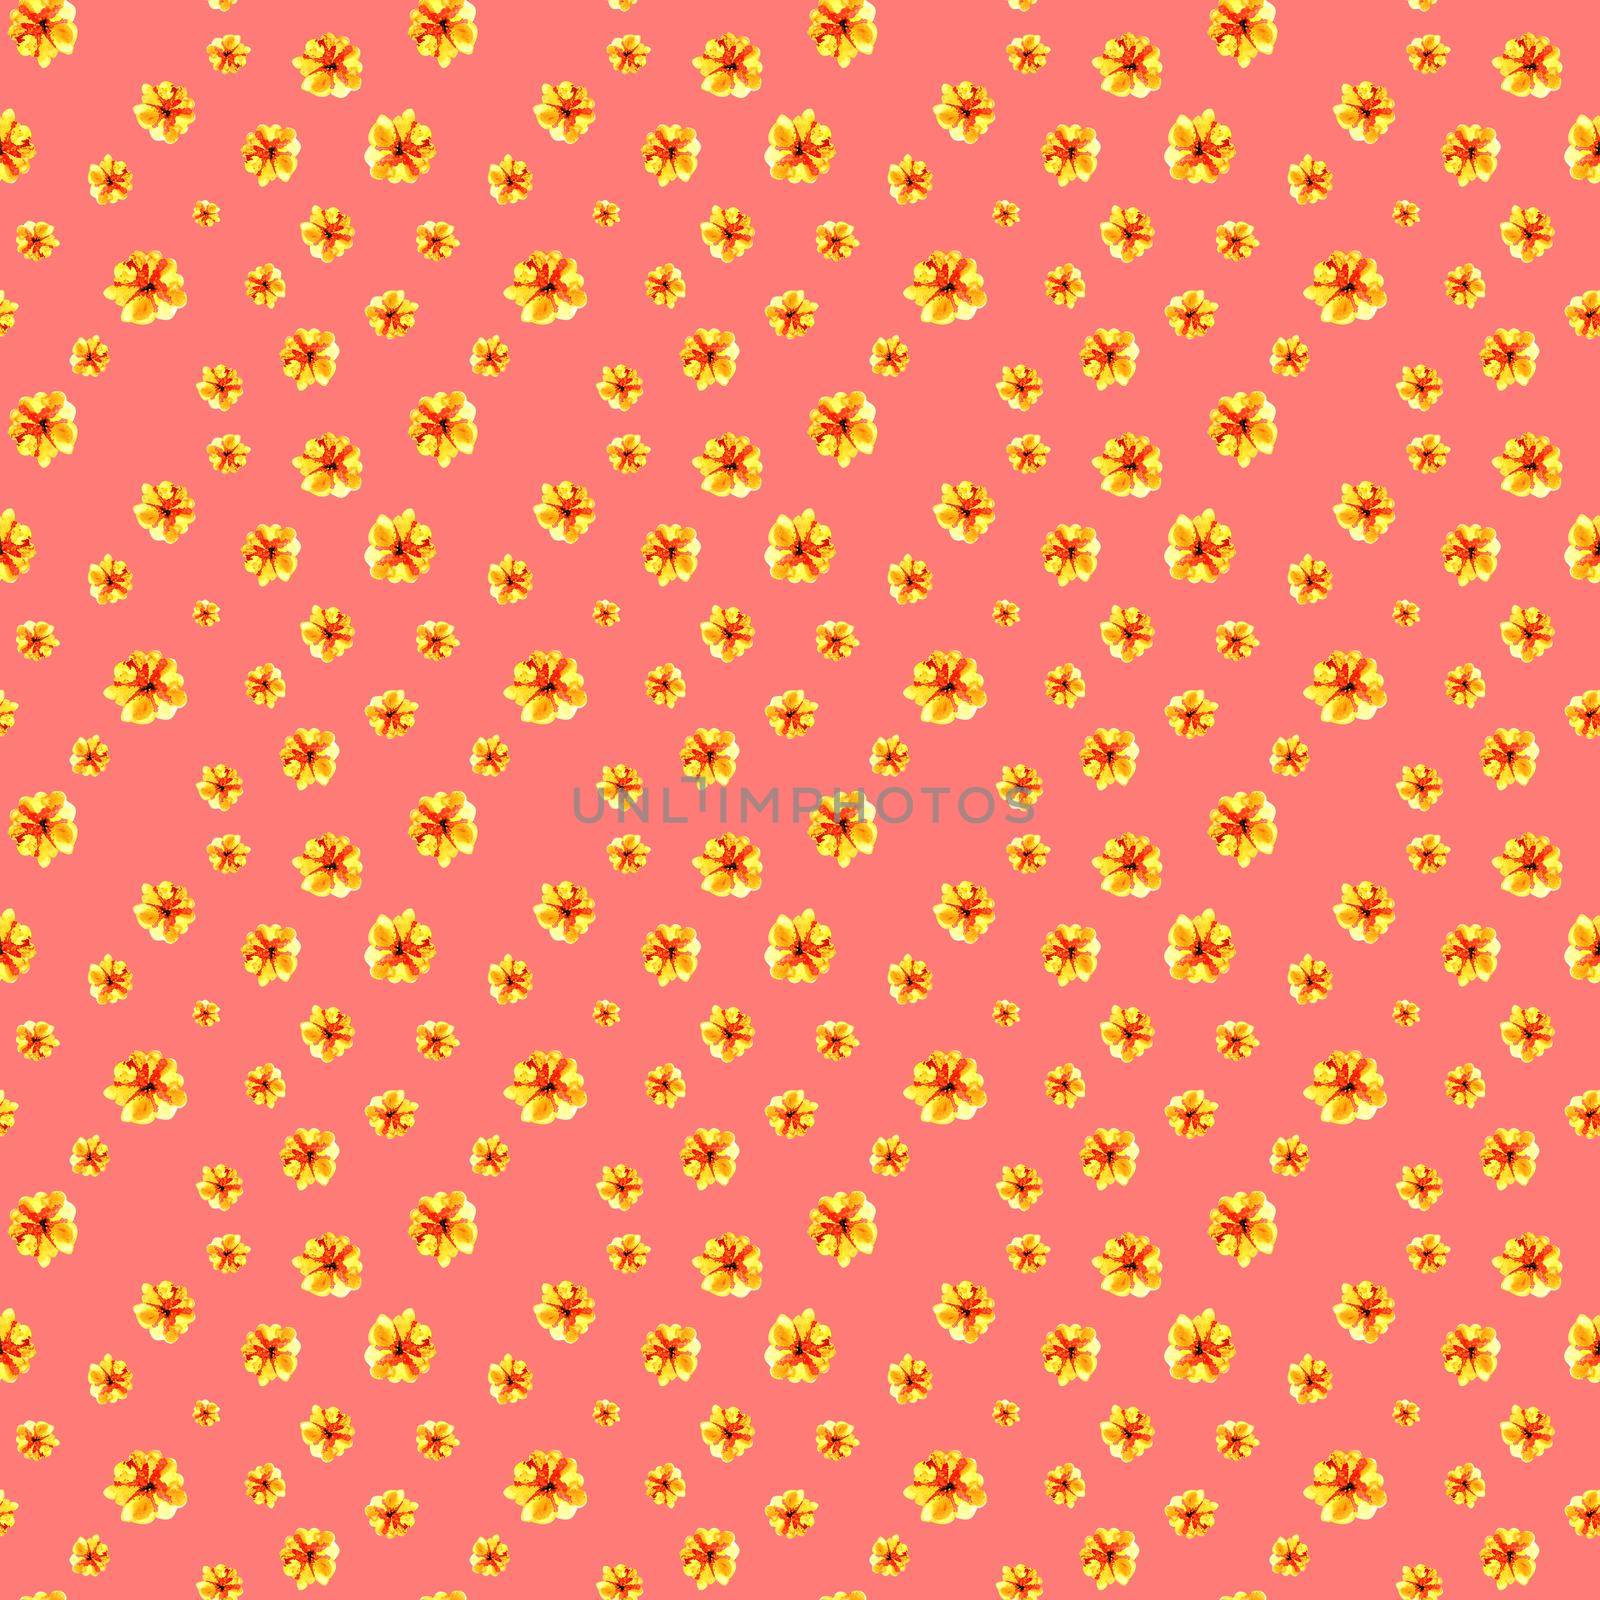 Lovely floral seamless pattern illustration of yellow flower on pink background